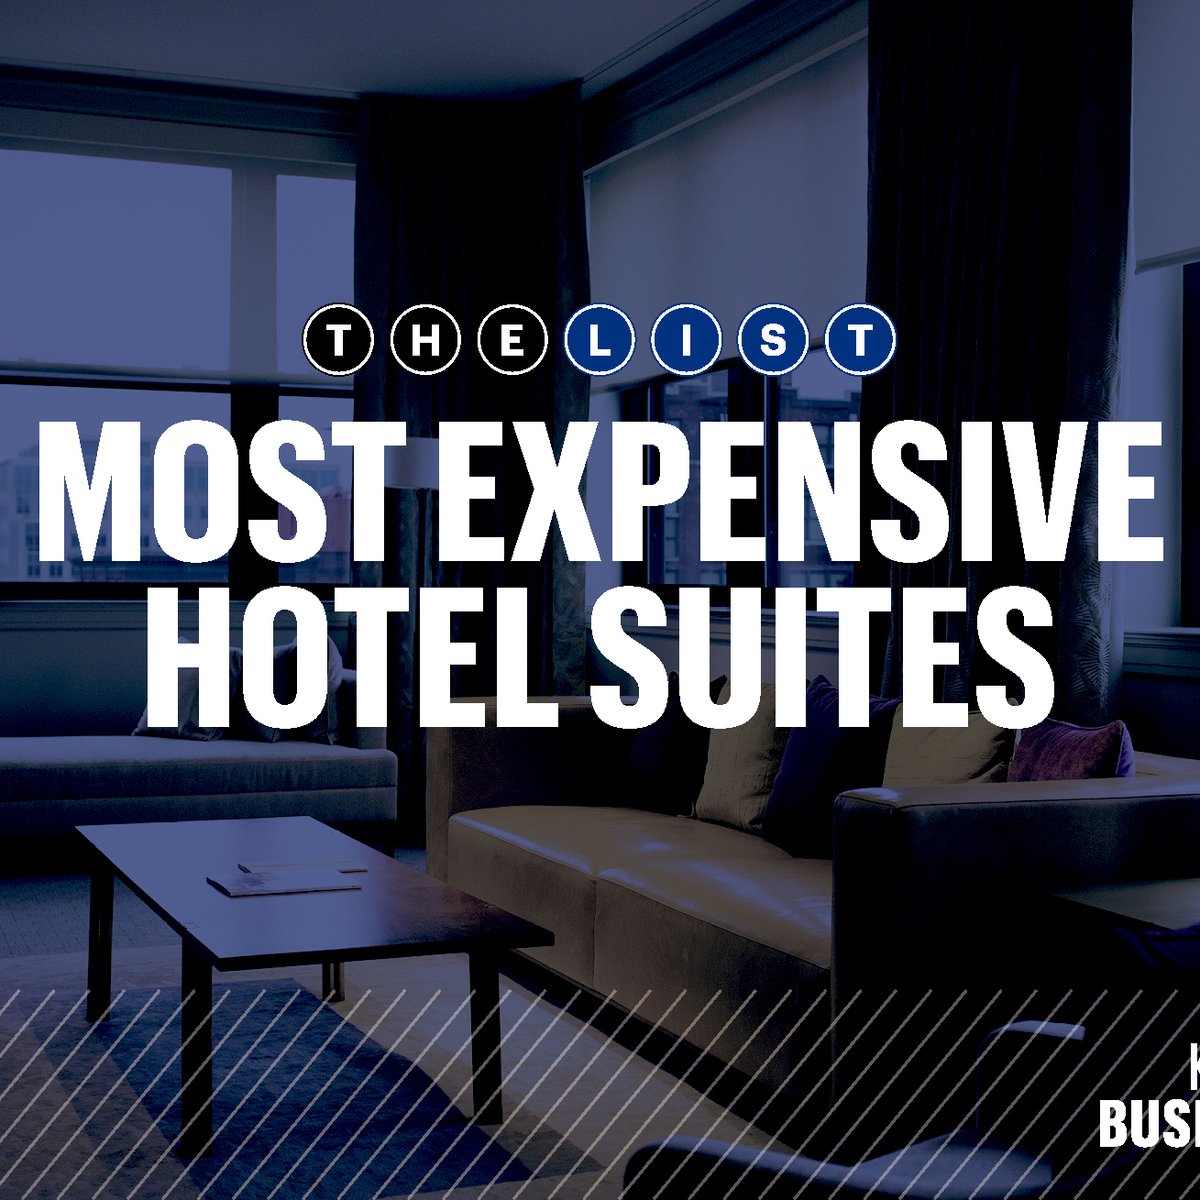 Most Expensive Luxury Suites